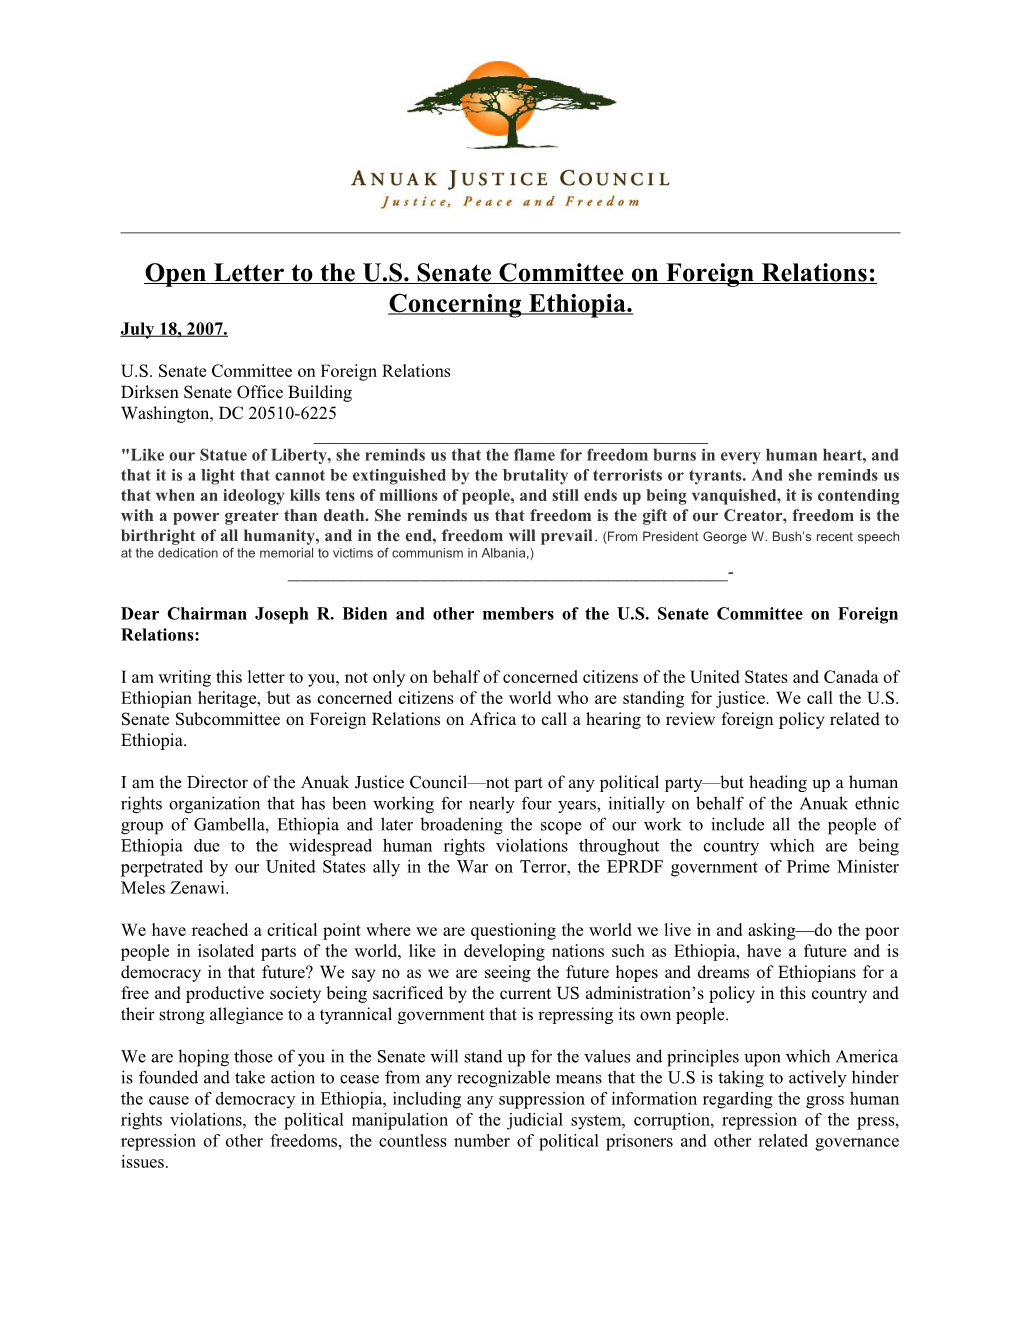 Open Letter to the U.S. Senate Committee on Foreign Relations: Concerning Ethiopia